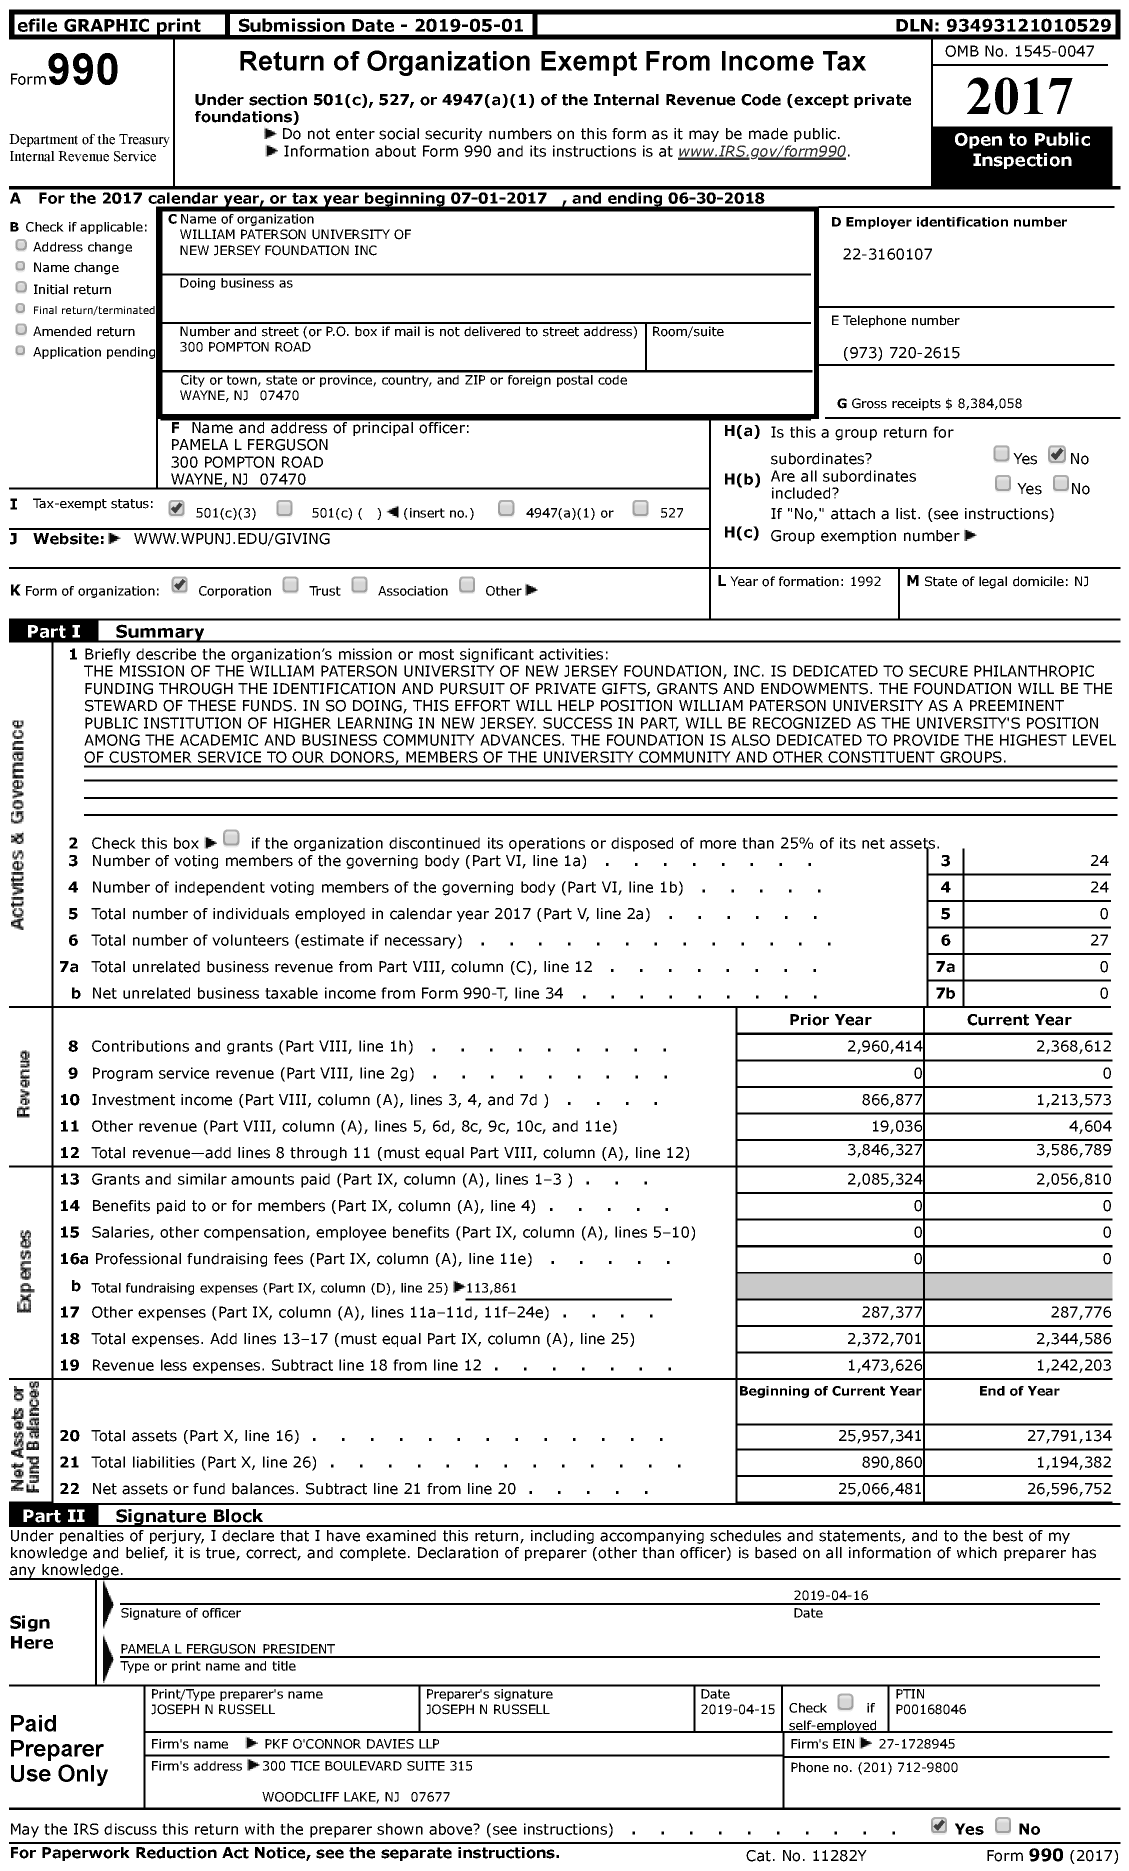 Image of first page of 2017 Form 990 for The William Paterson University of New Jersey (WPUNJ)